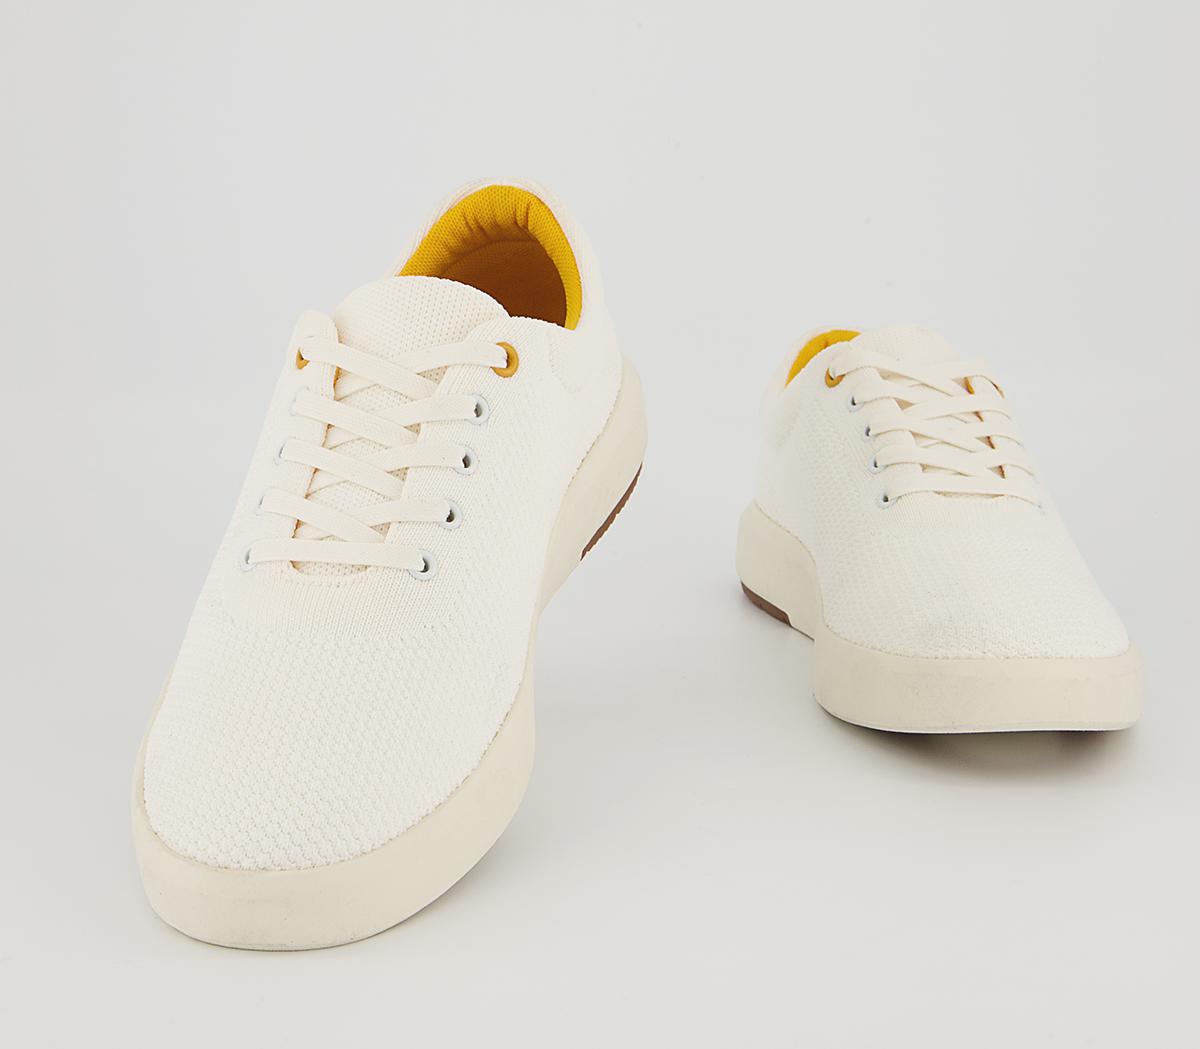 OFFICE Callow Knitted Wedge Sneakers White - Men's Casual Shoes